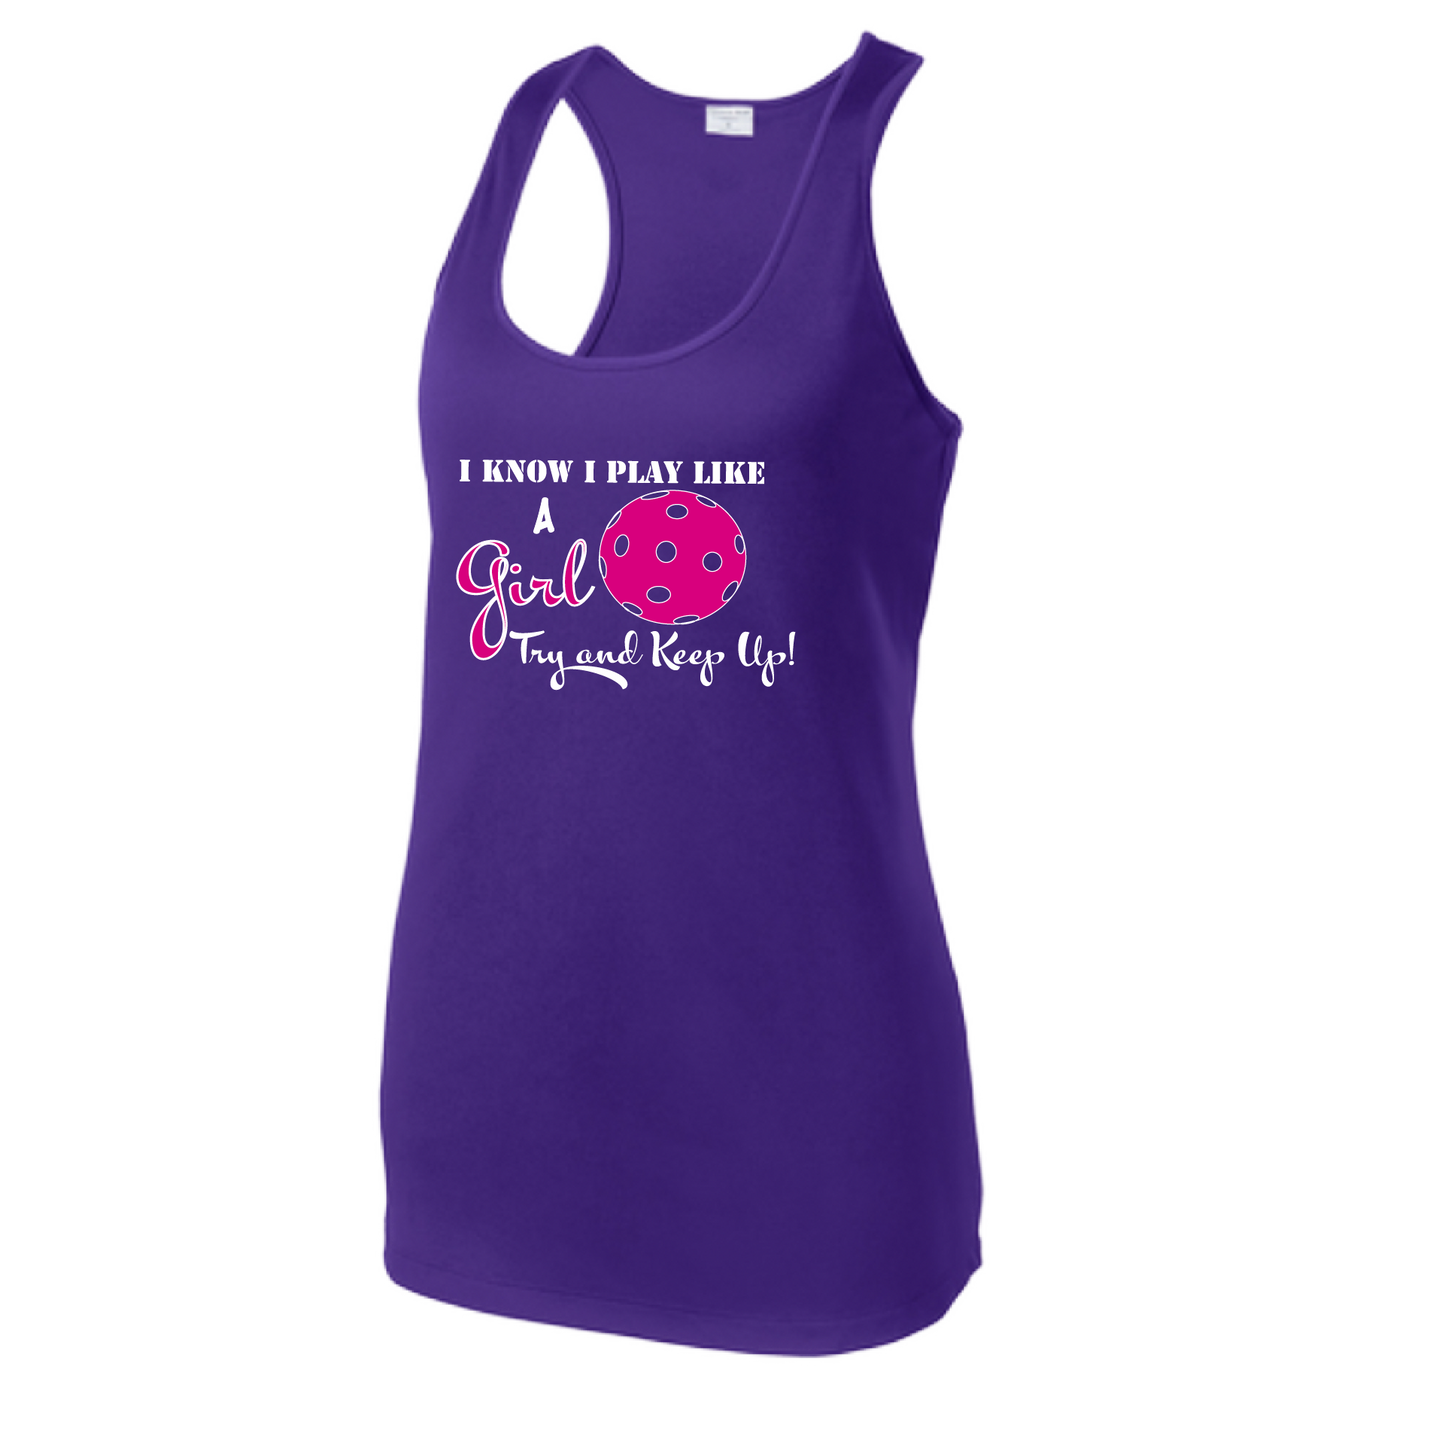 Pickleball Design: I know I Play Like a Girl, Try to Keep Up -  Women's Style: Racerback Tank  Turn up the volume in this Women's shirt with its perfect mix of softness and attitude. Material is ultra-comfortable with moisture wicking properties and tri-blend softness. PosiCharge technology locks in color. Highly breathable and lightweight.